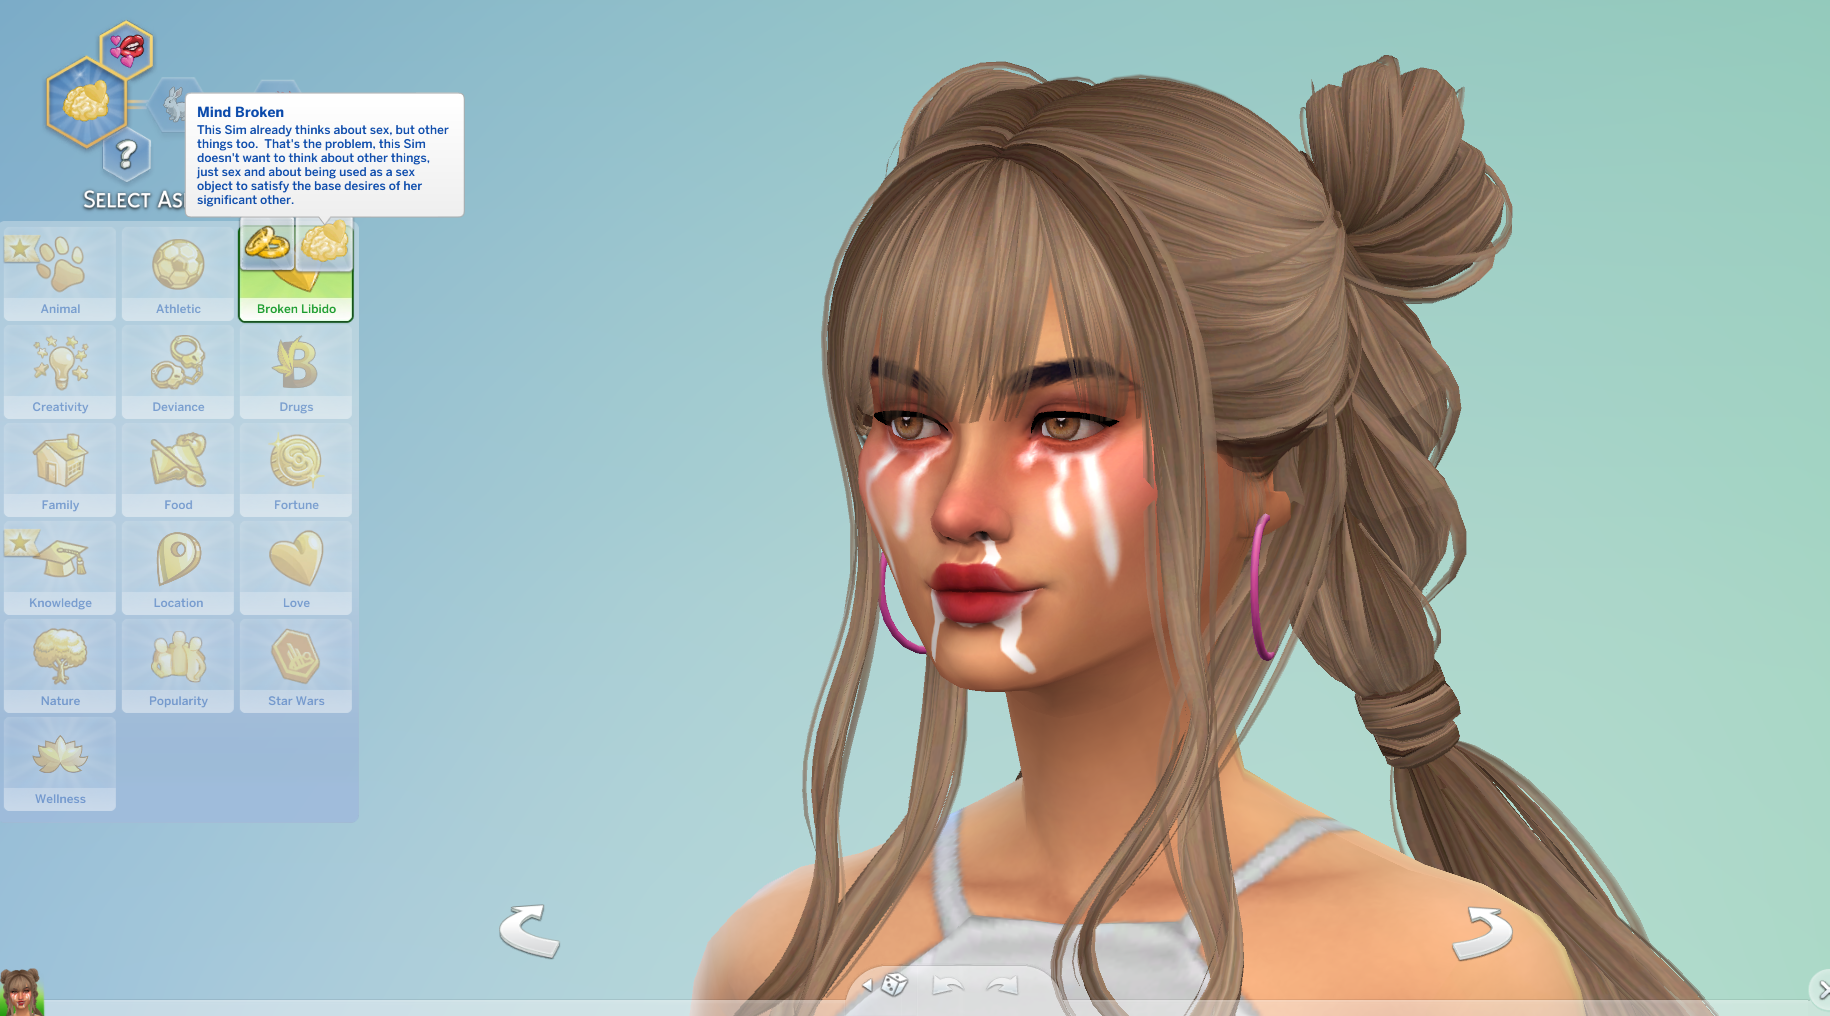 Play the Sims 4 With Nisas Wicked Perversions, a Super NSFW Mod for the Sims